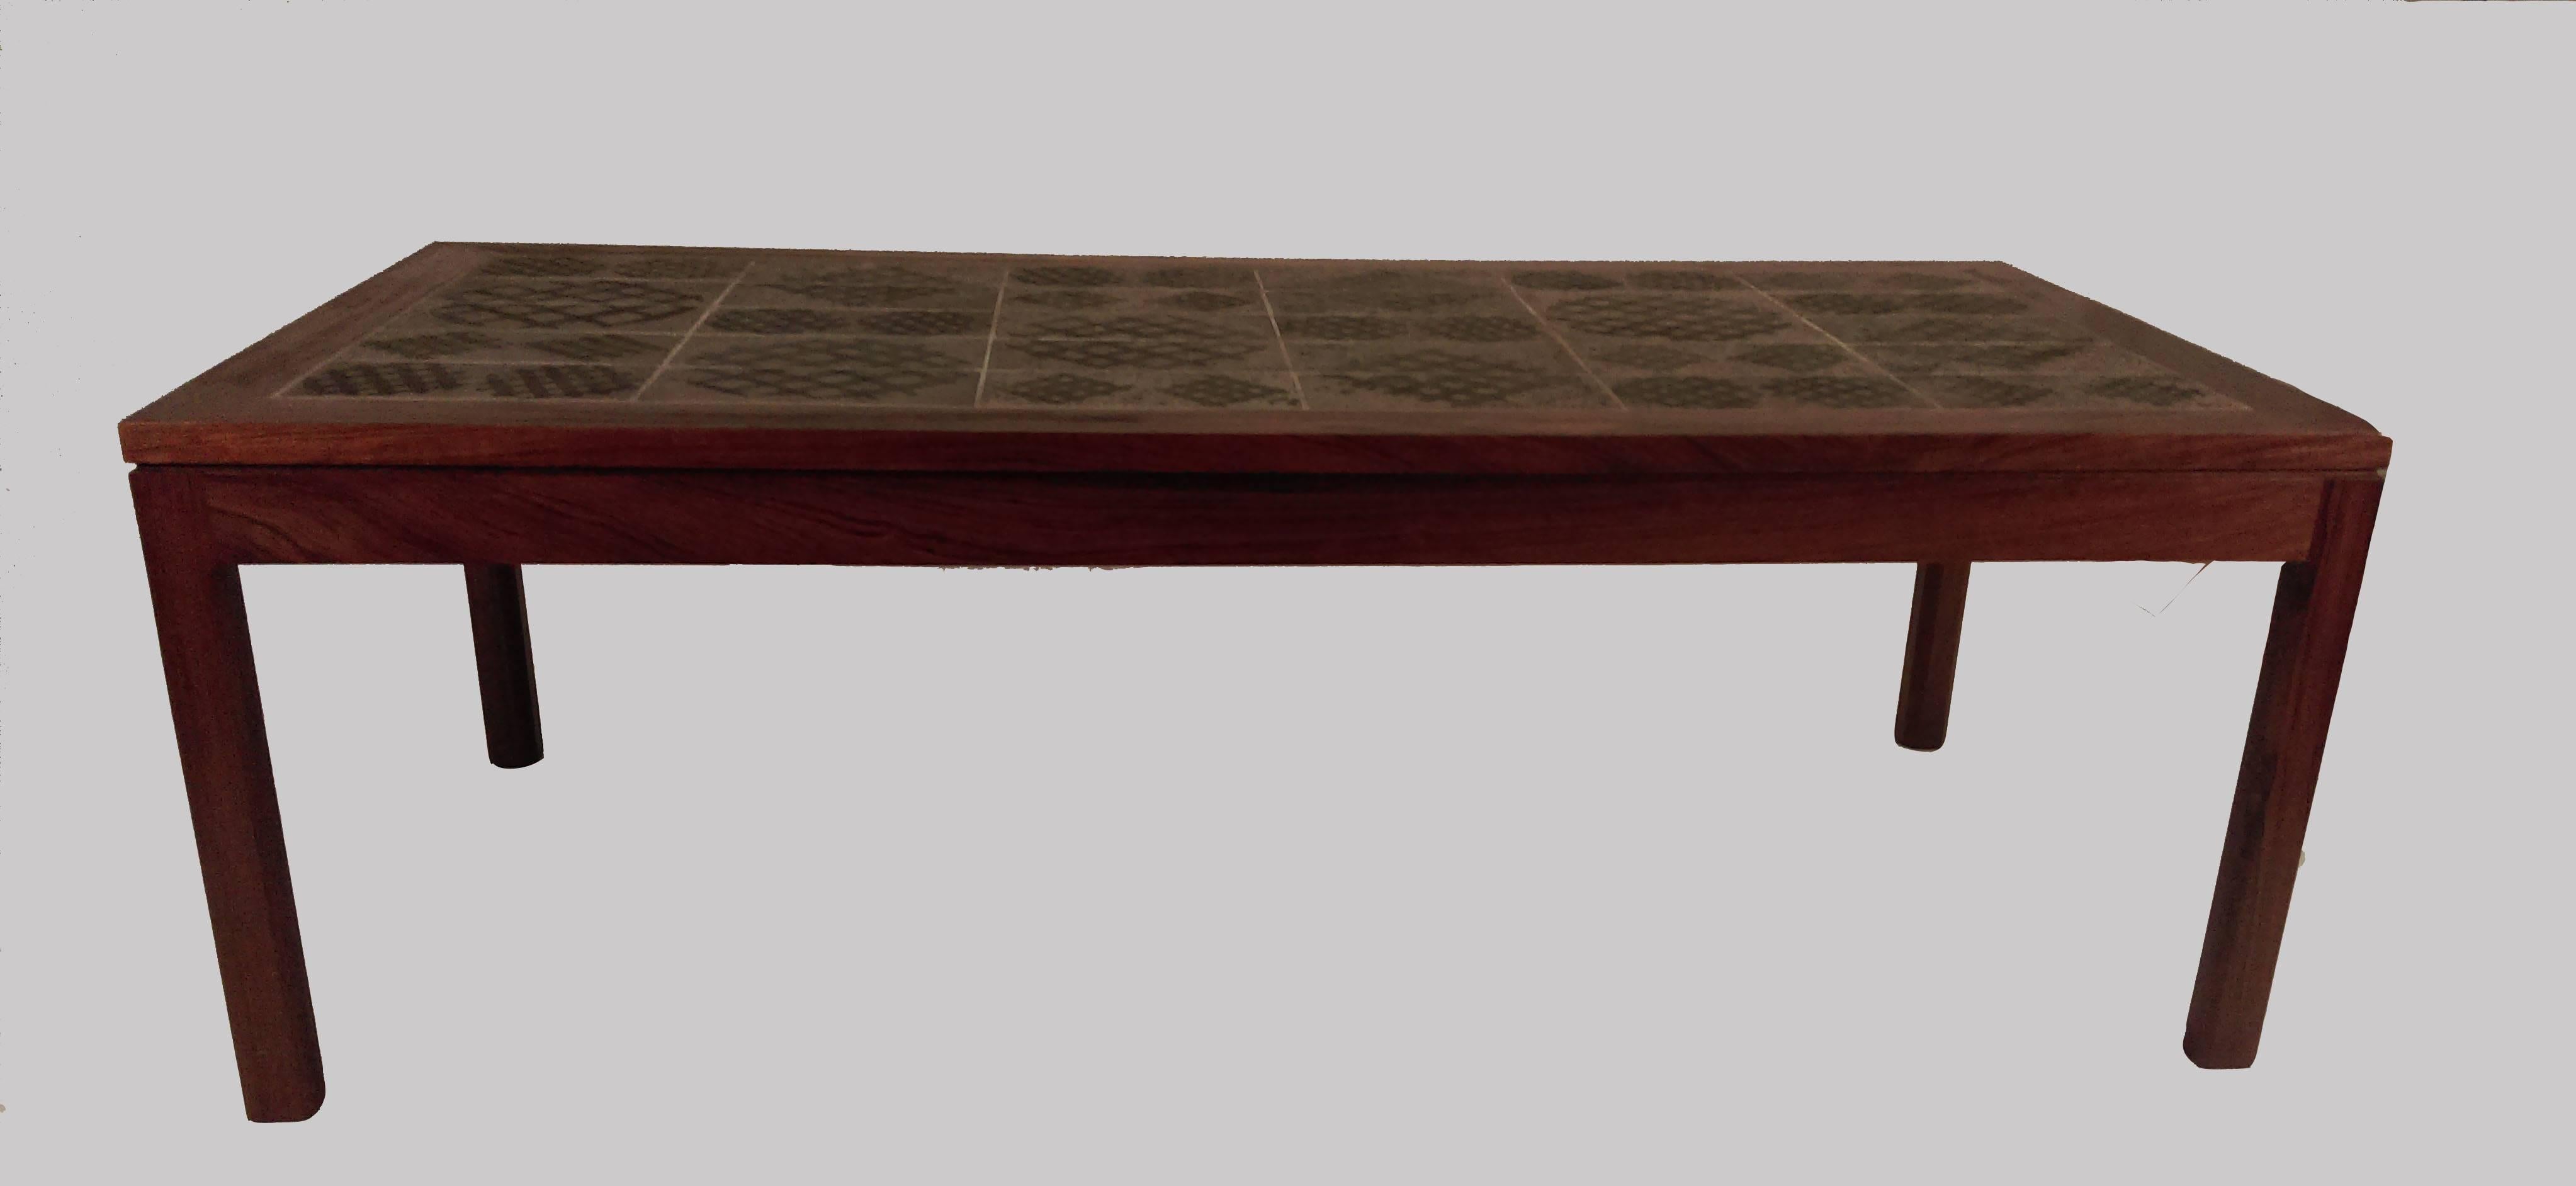 Tue Poulsen tile topped coffee table in rosewood signed by Danish artist Tue Poulsen.

